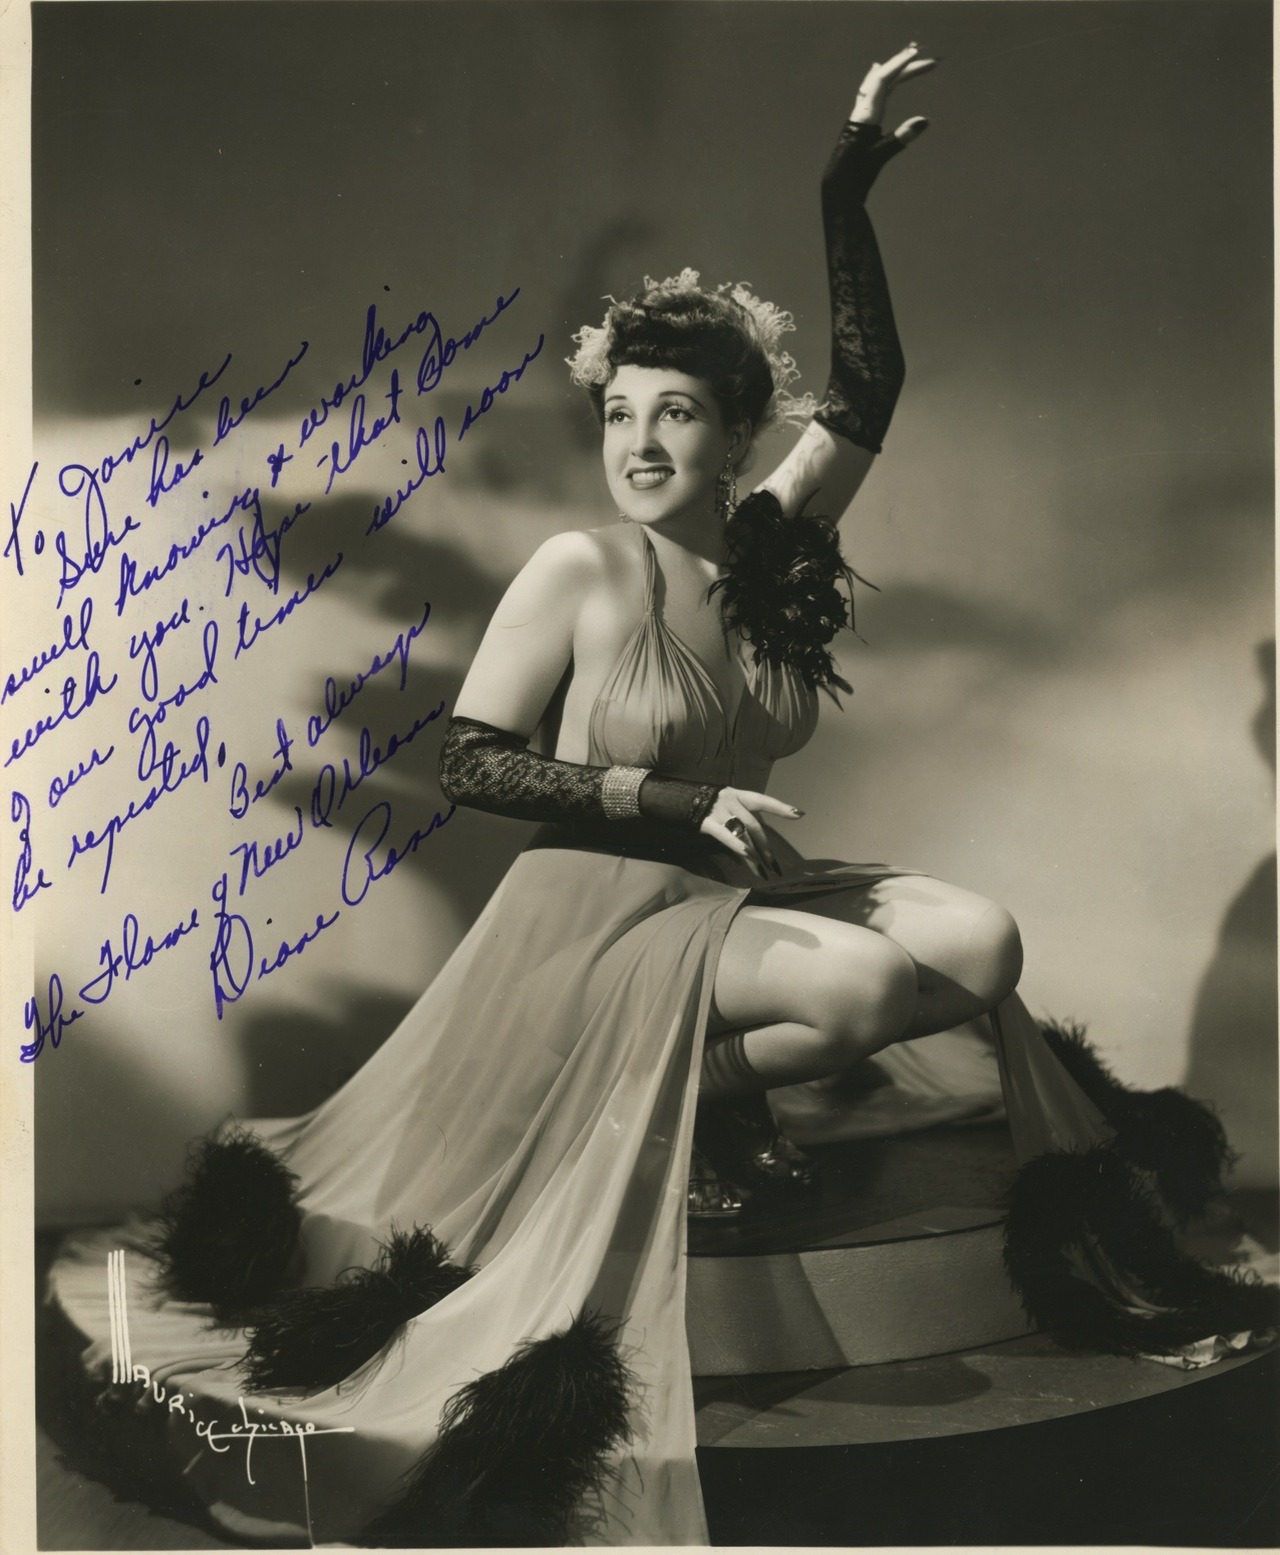 burlyqnell:   Diane Ross    Vintage 50’s-era promo photo personalized to fellow